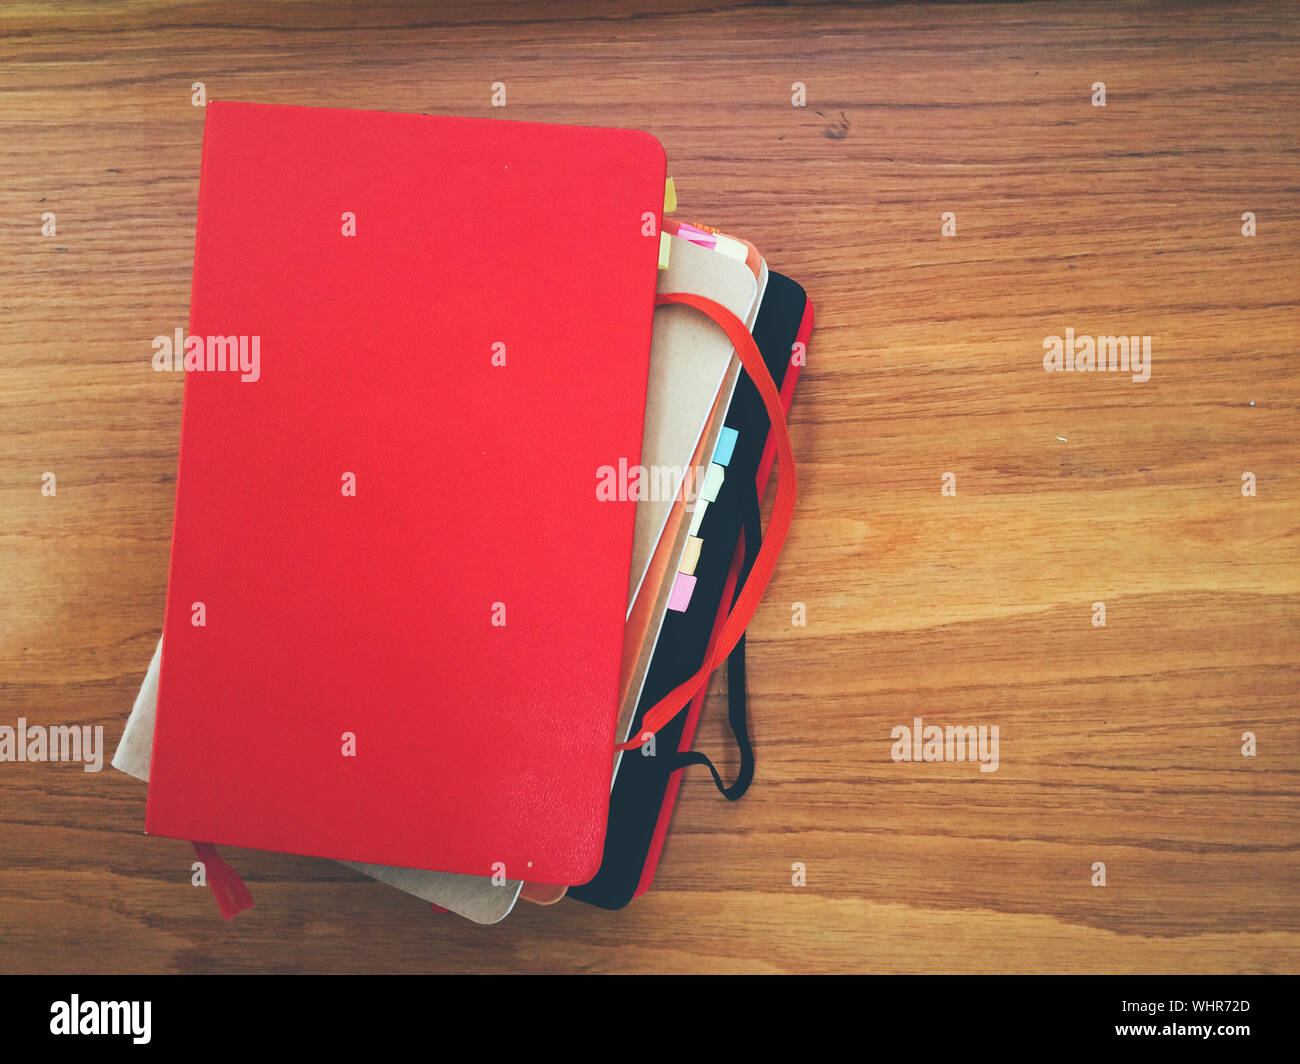 High Angle View Of Diaries On Wooden Table Stock Photo